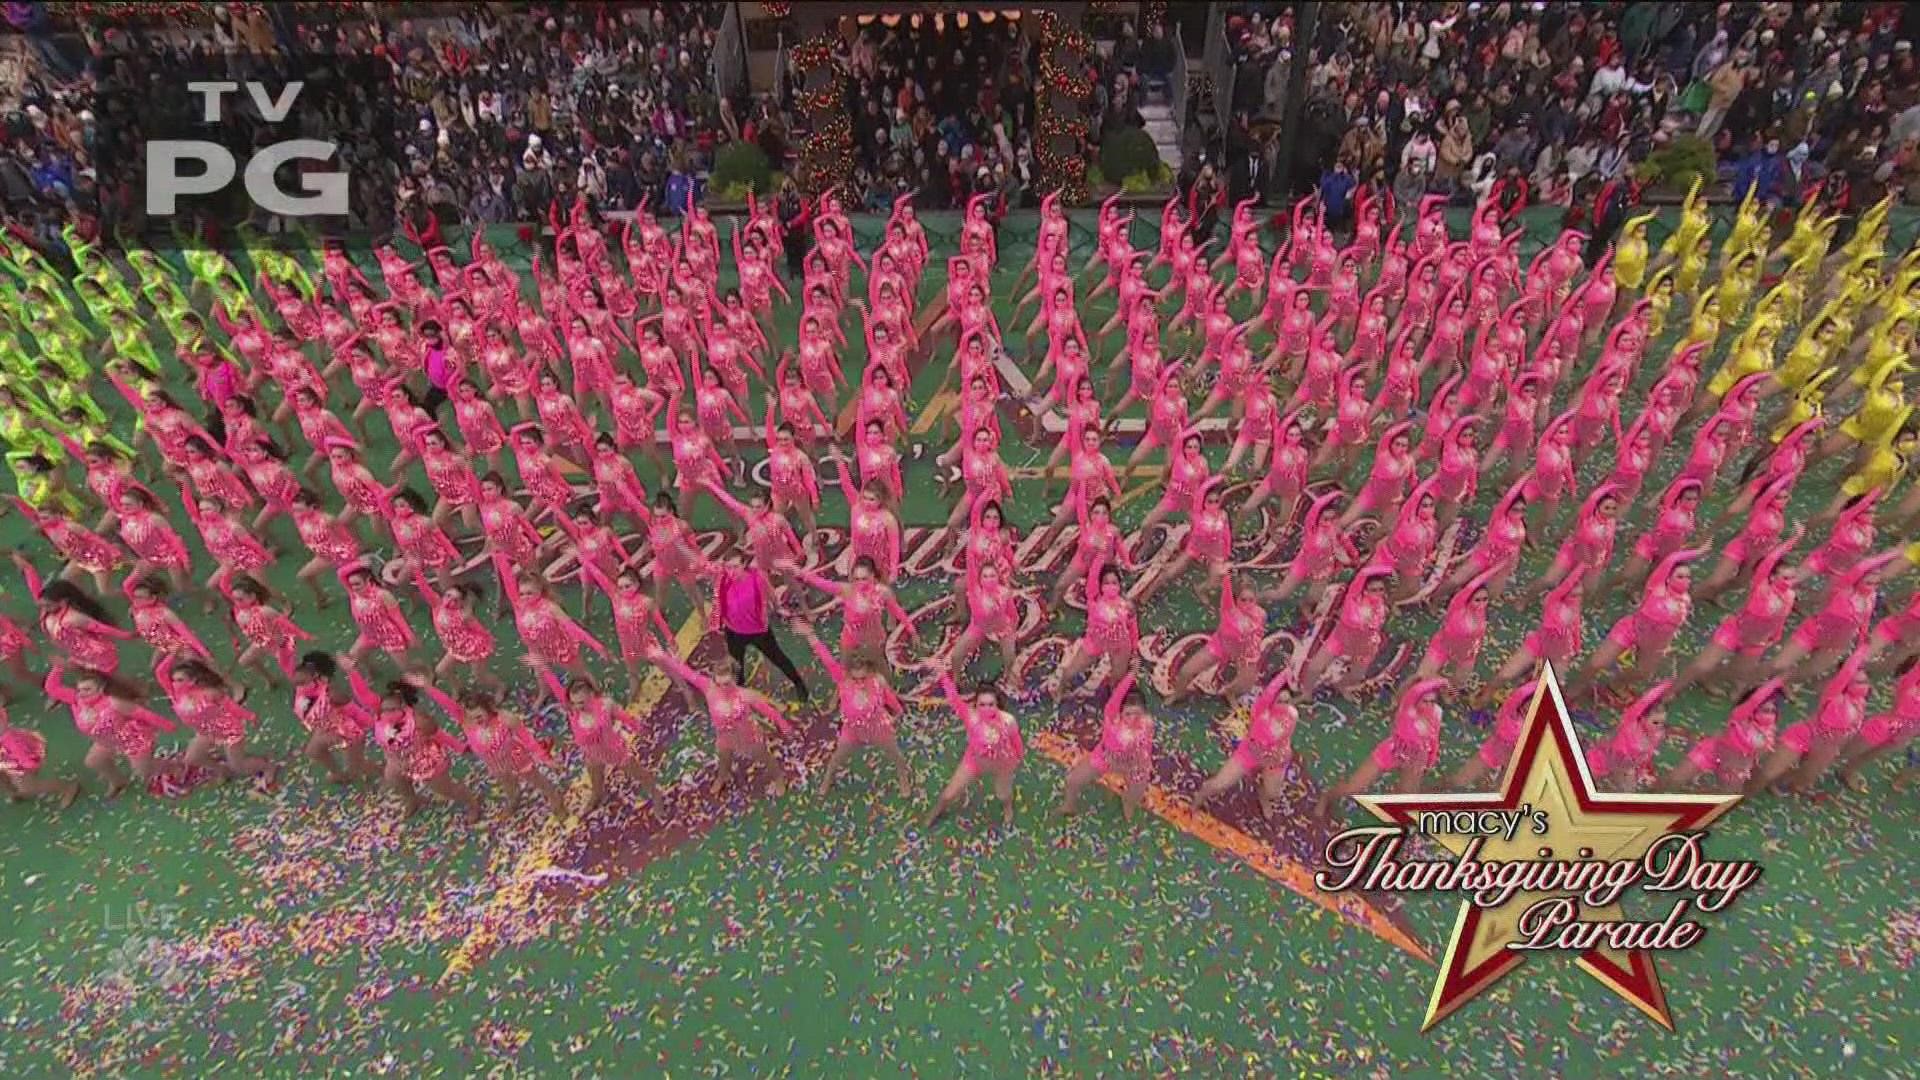 Dancers from Jill Stanford Reeves’ Dance Center in Brunswick perform in the Macy’s Thanksgiving Day Parade.